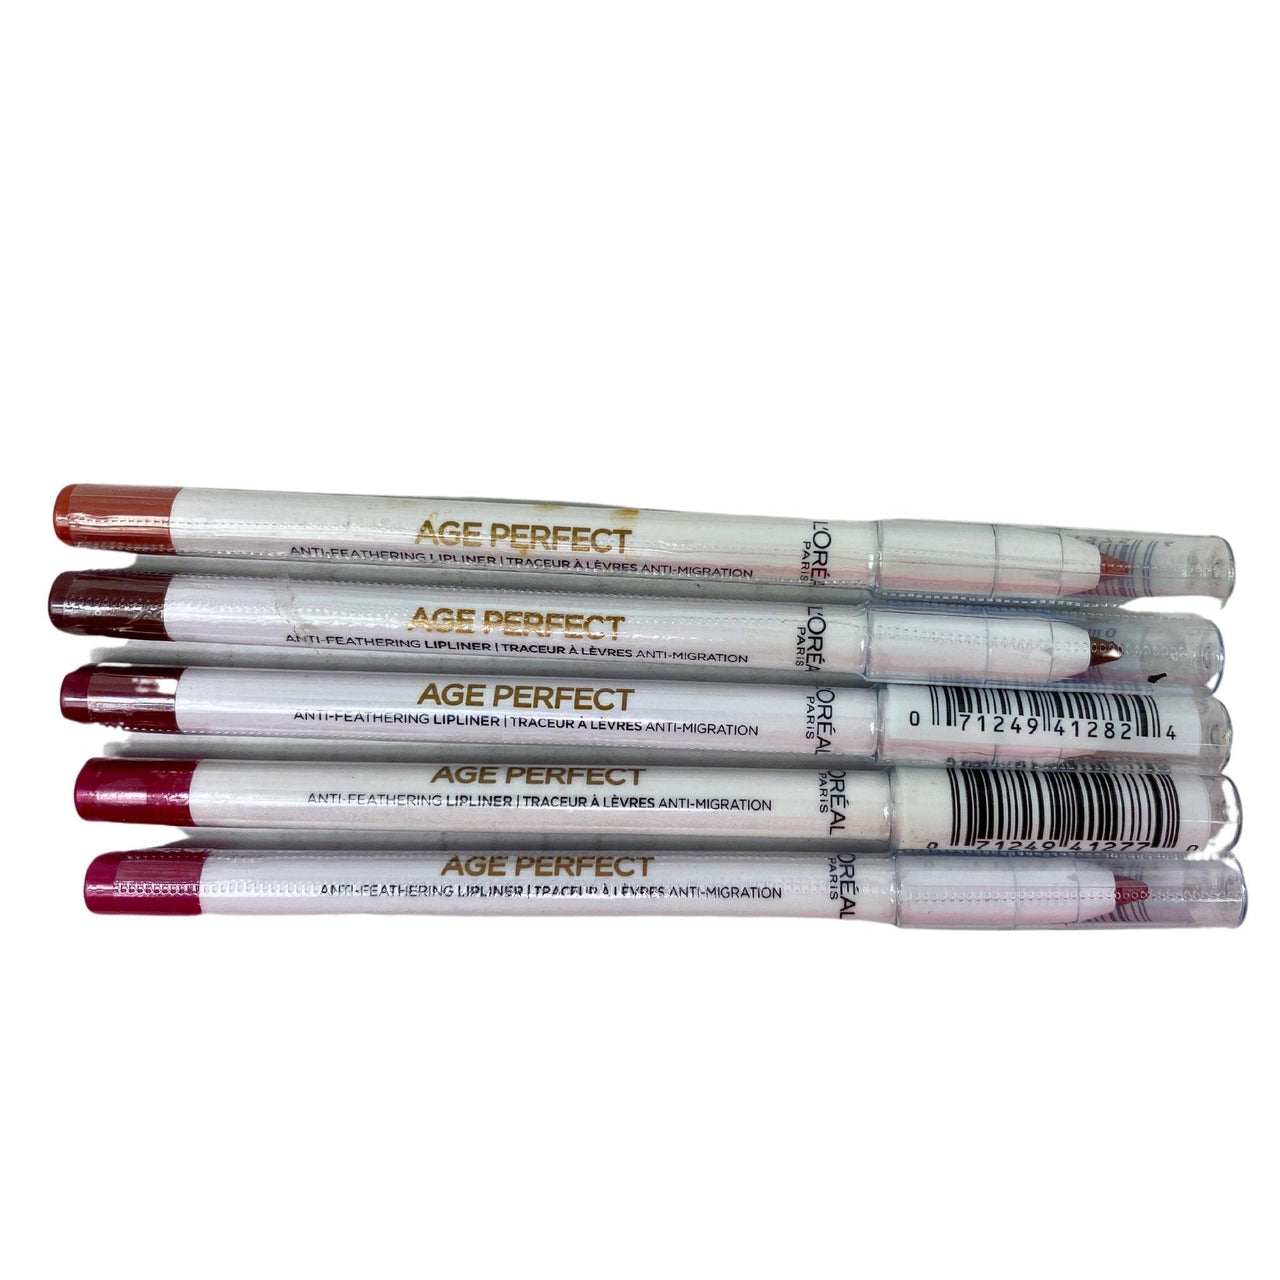 L'Oreal Age Perfect Anti-Feathering Lipliner Assorted Mix (50 Pcs Lot) - Discount Wholesalers Inc